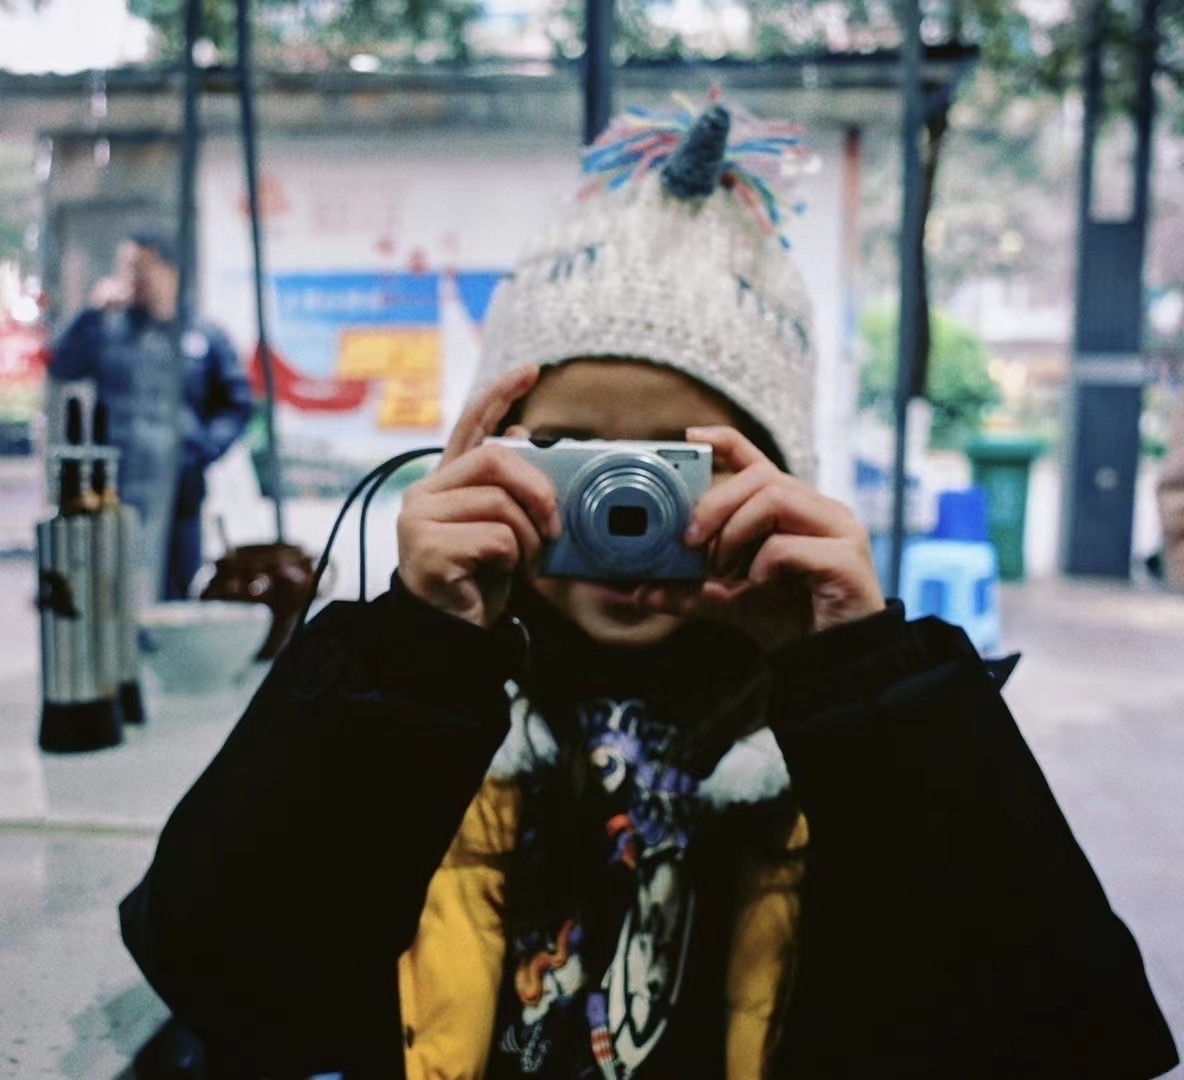 Girl taking a photo, with camera in front of her face